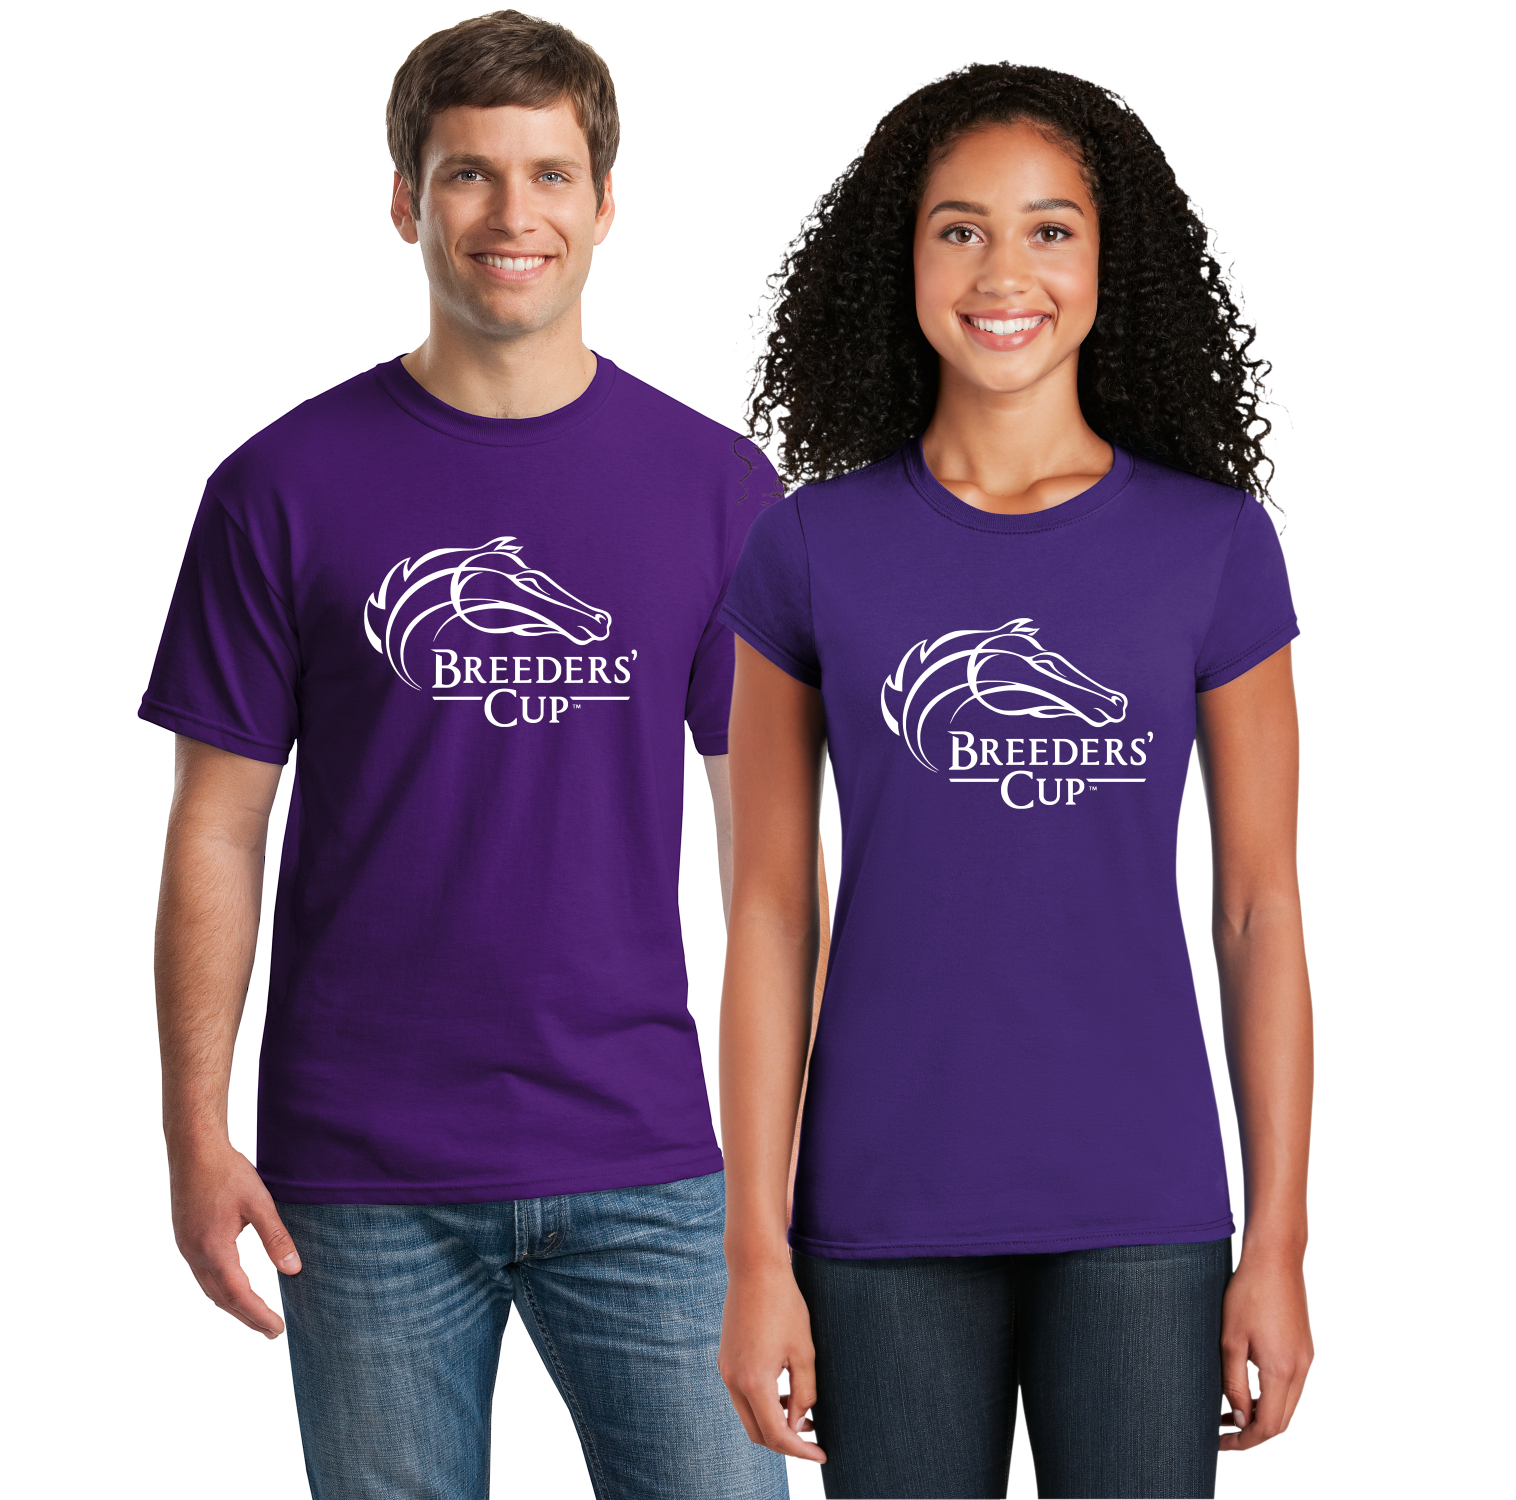 Breeders Cup 2021 Del Mar Tee Shirt - Mens and Ladies Size up to 5x